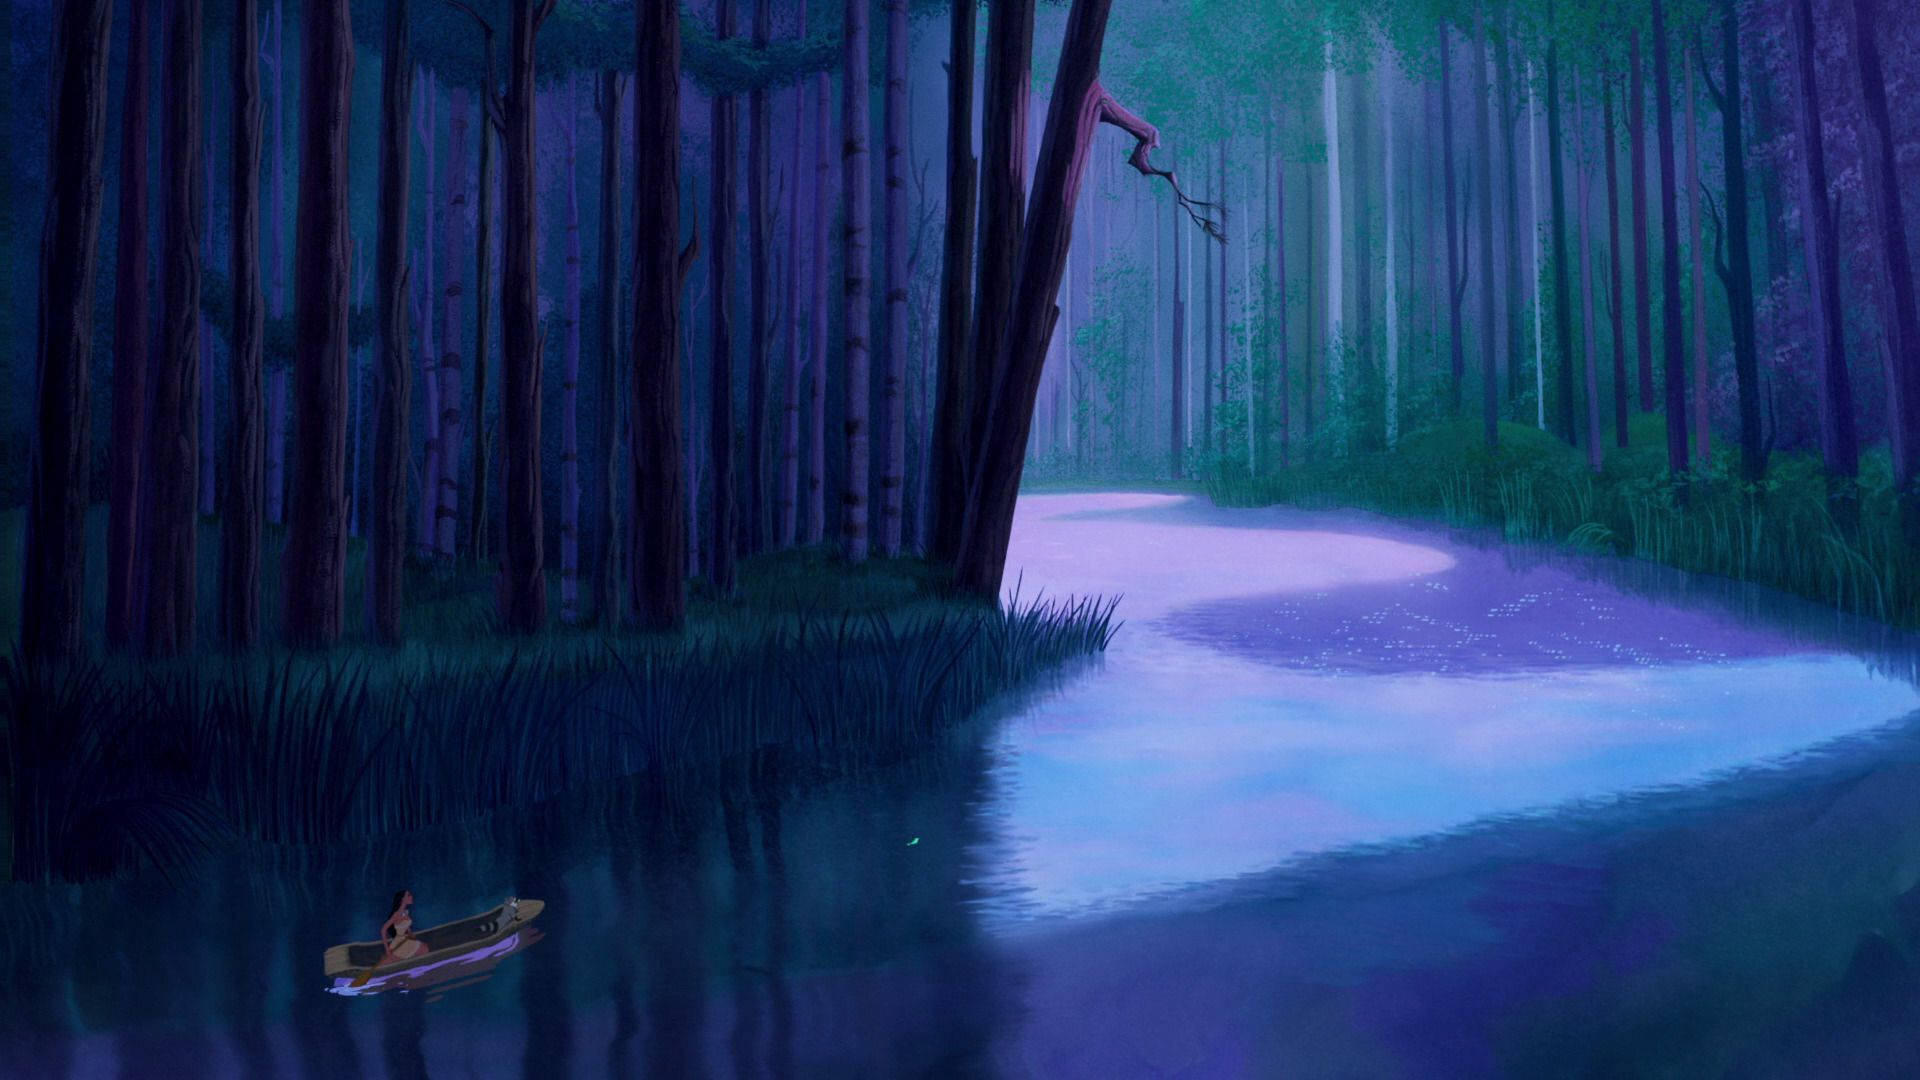 1920x1080 Download Pocahontas In The River Wallpaper